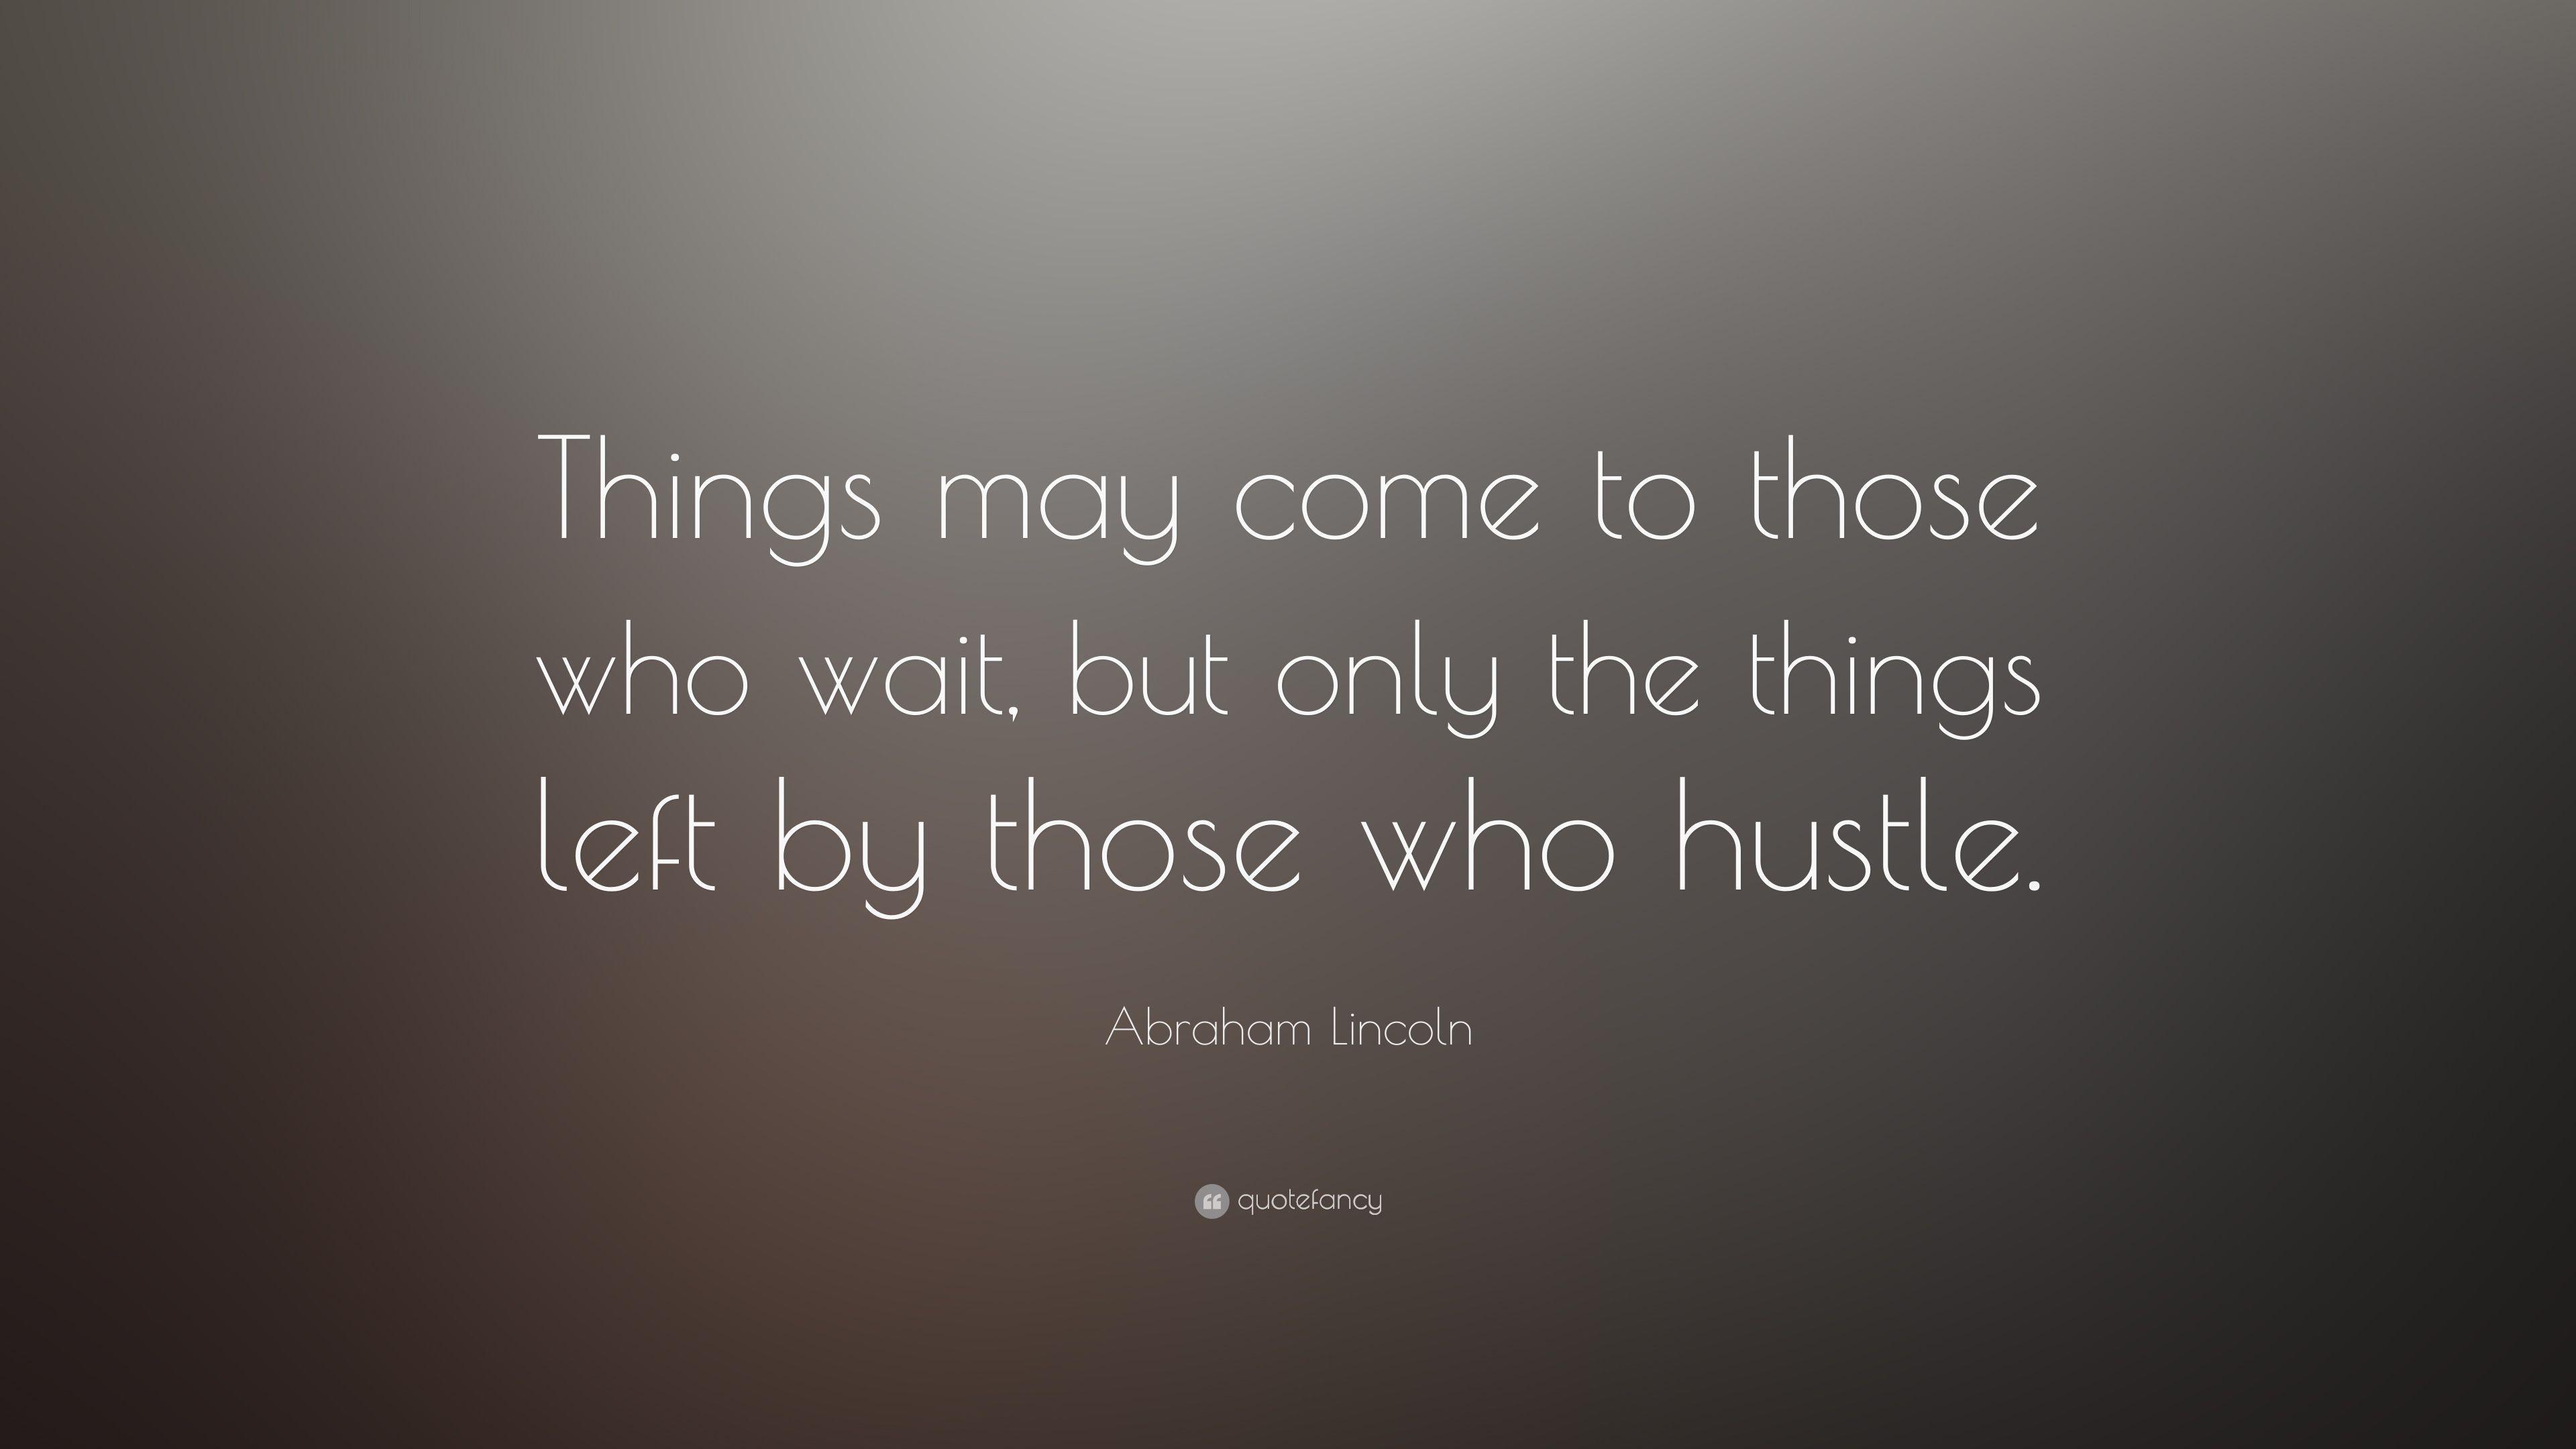 Abraham Lincoln Quote: “Things may come to those who wait, but